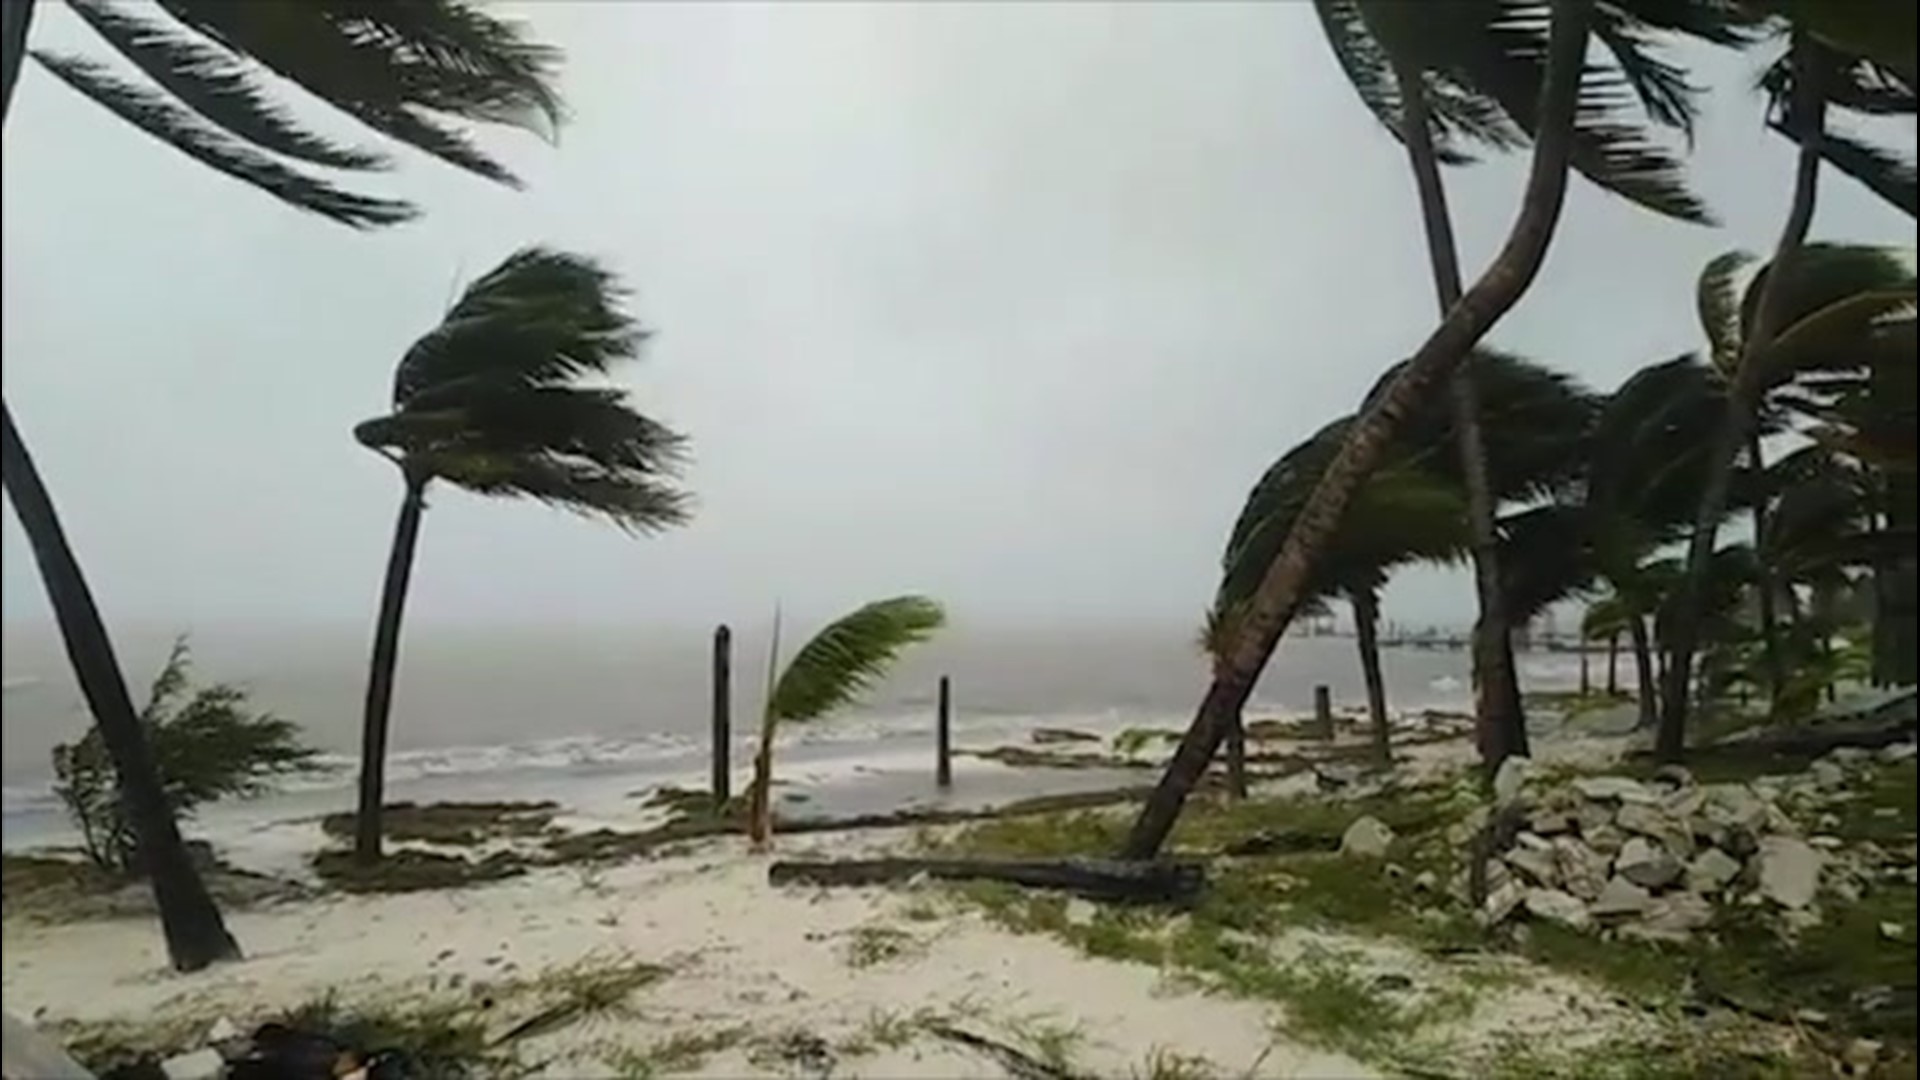 Trees were whipped around as high winds and heavy rain hit Cancún, Quintana Roo, Mexico, as Tropical Storm Gamma passed through on Oct. 3.